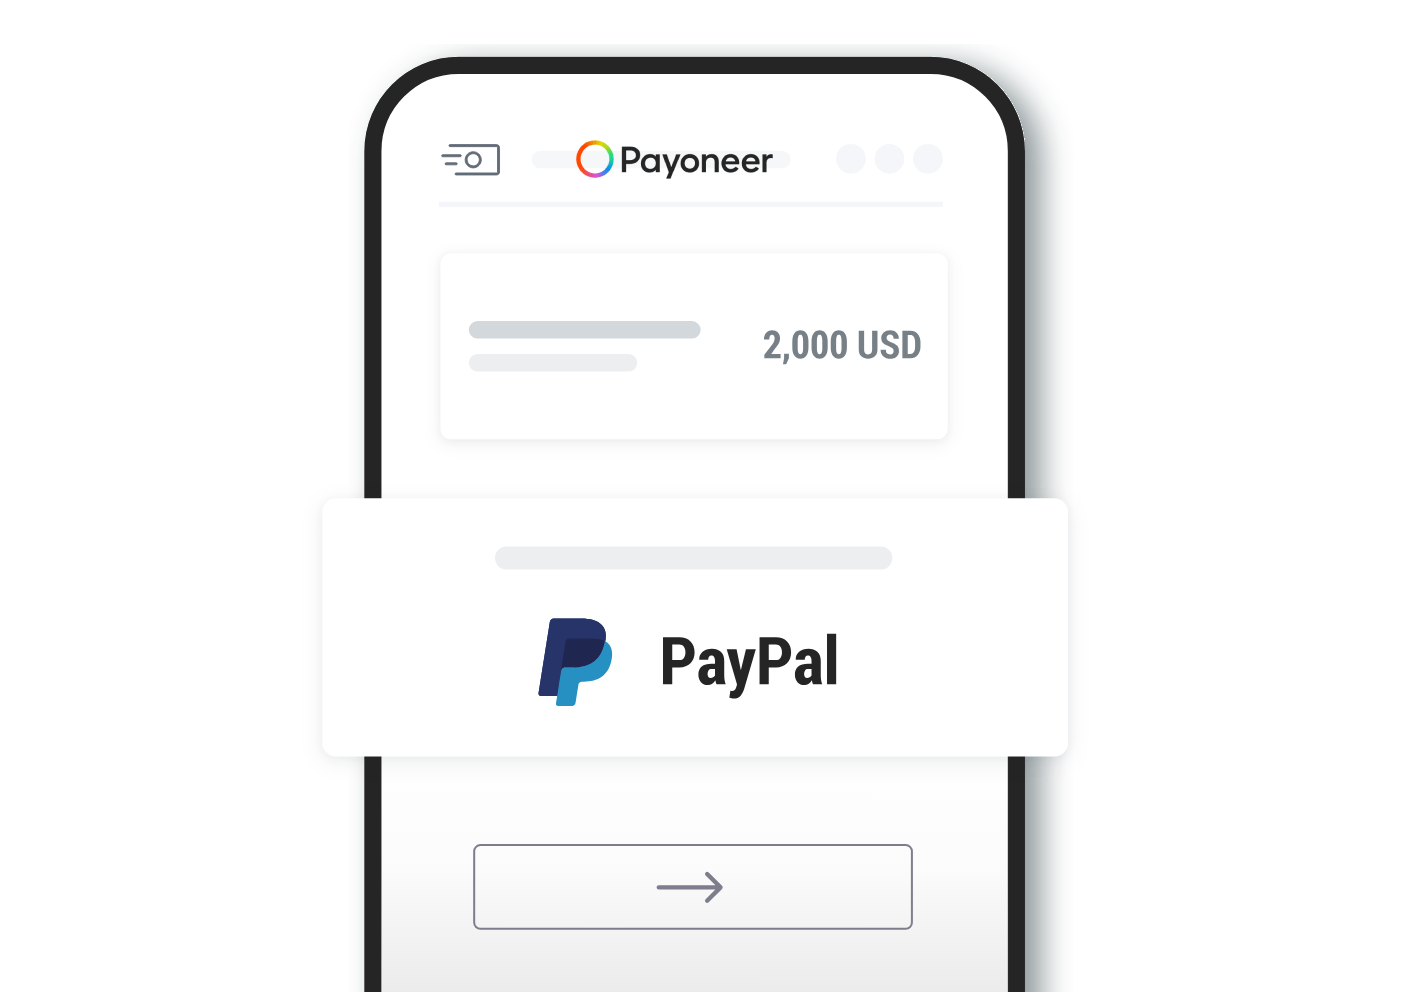 Payoneer's PayPal integration expands accessibility, benefiting freelancers in countries without PayPal services, promoting financial inclusivity.